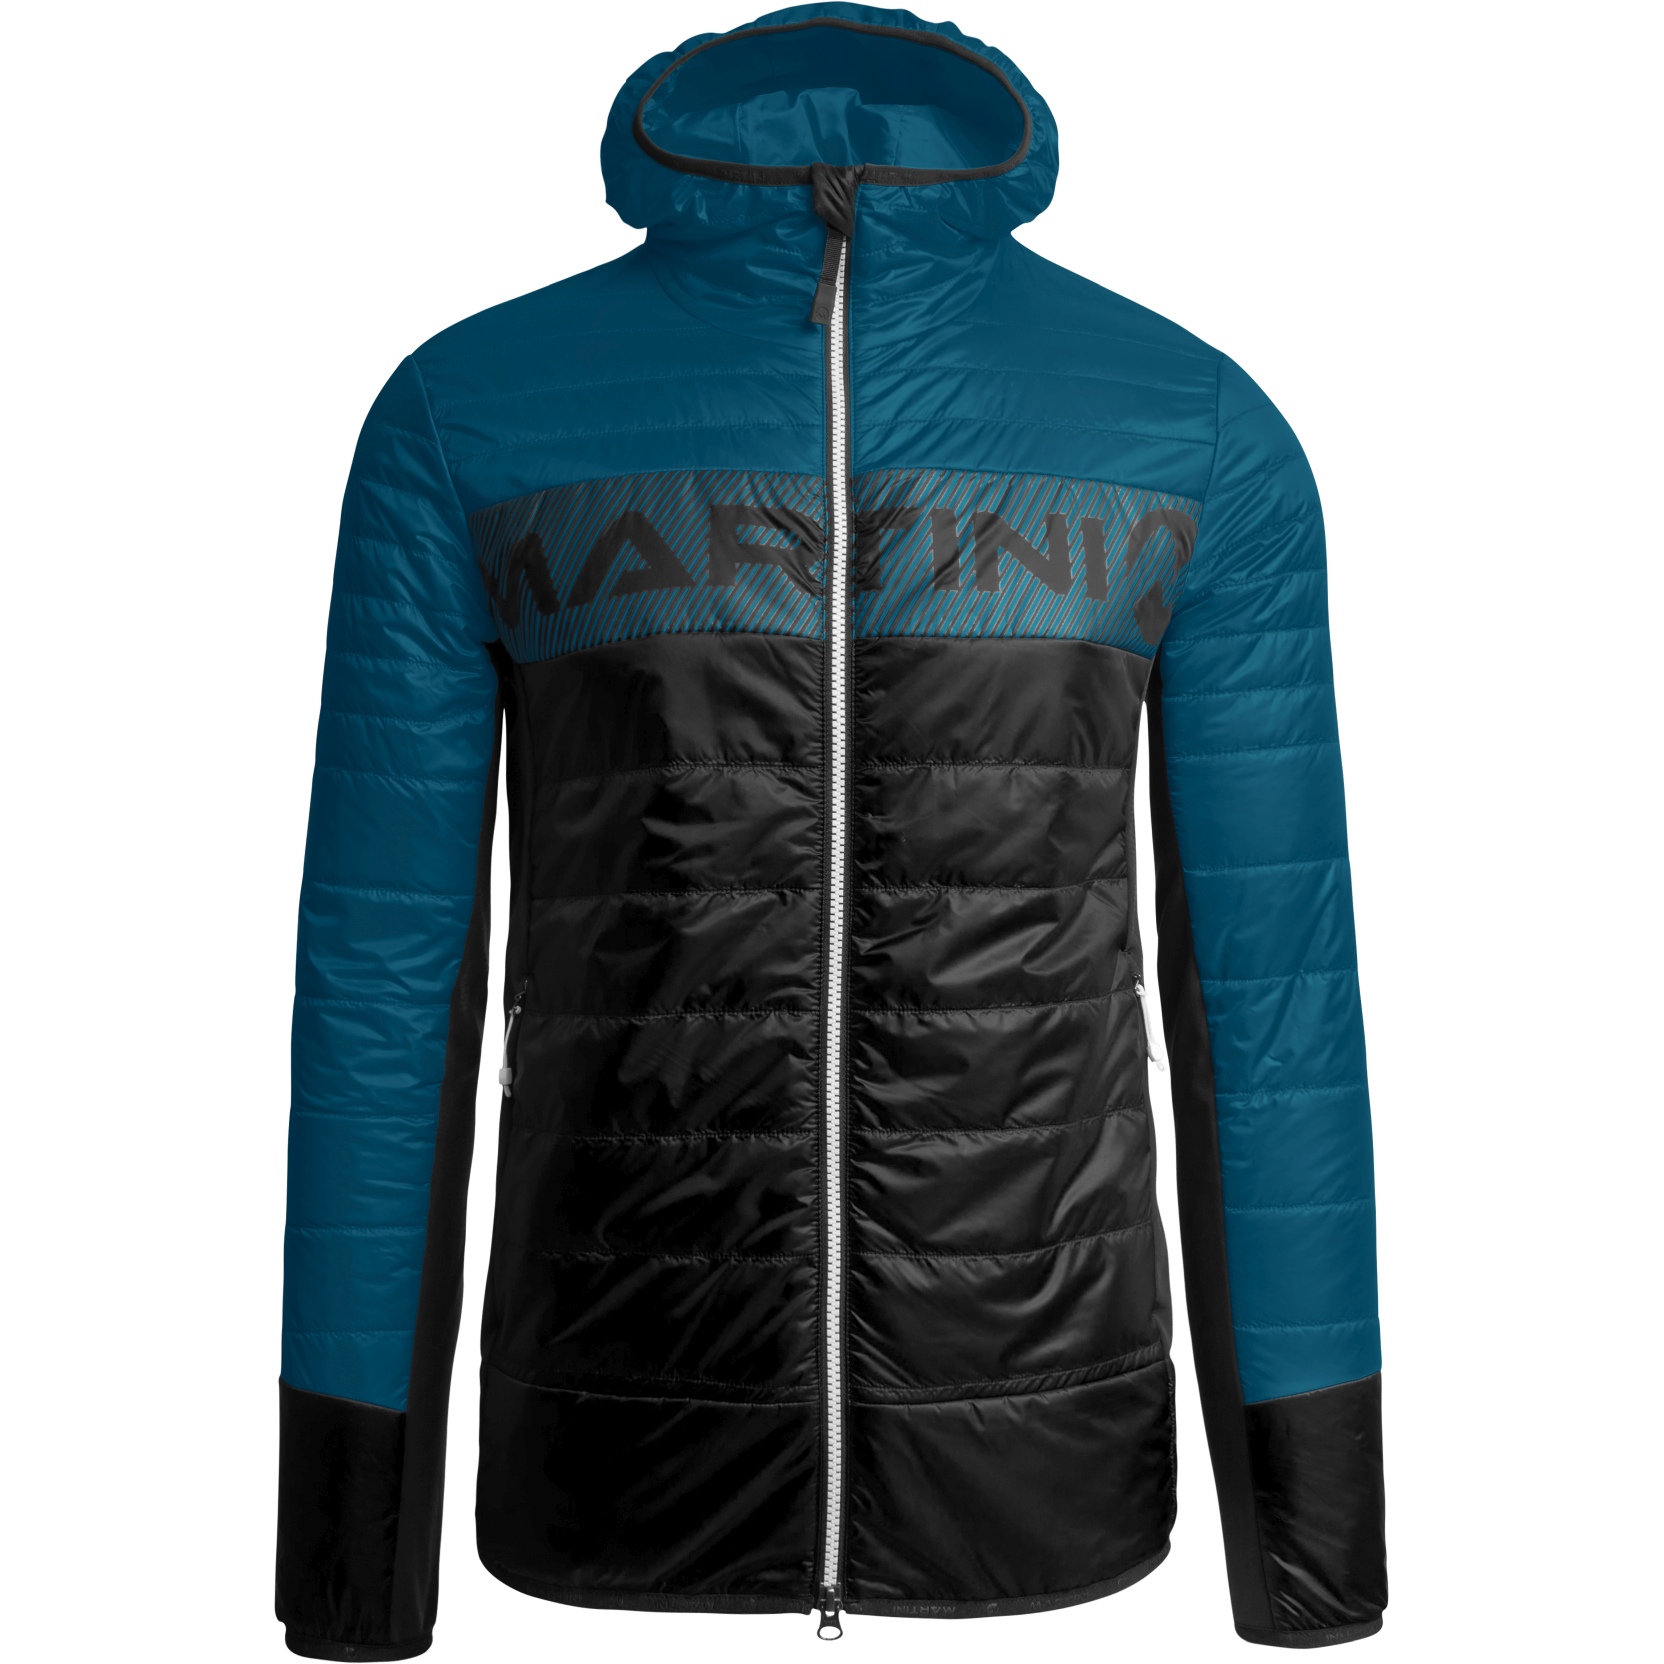 Picture of Martini Sportswear Over The Top Jacket - deep sea/black